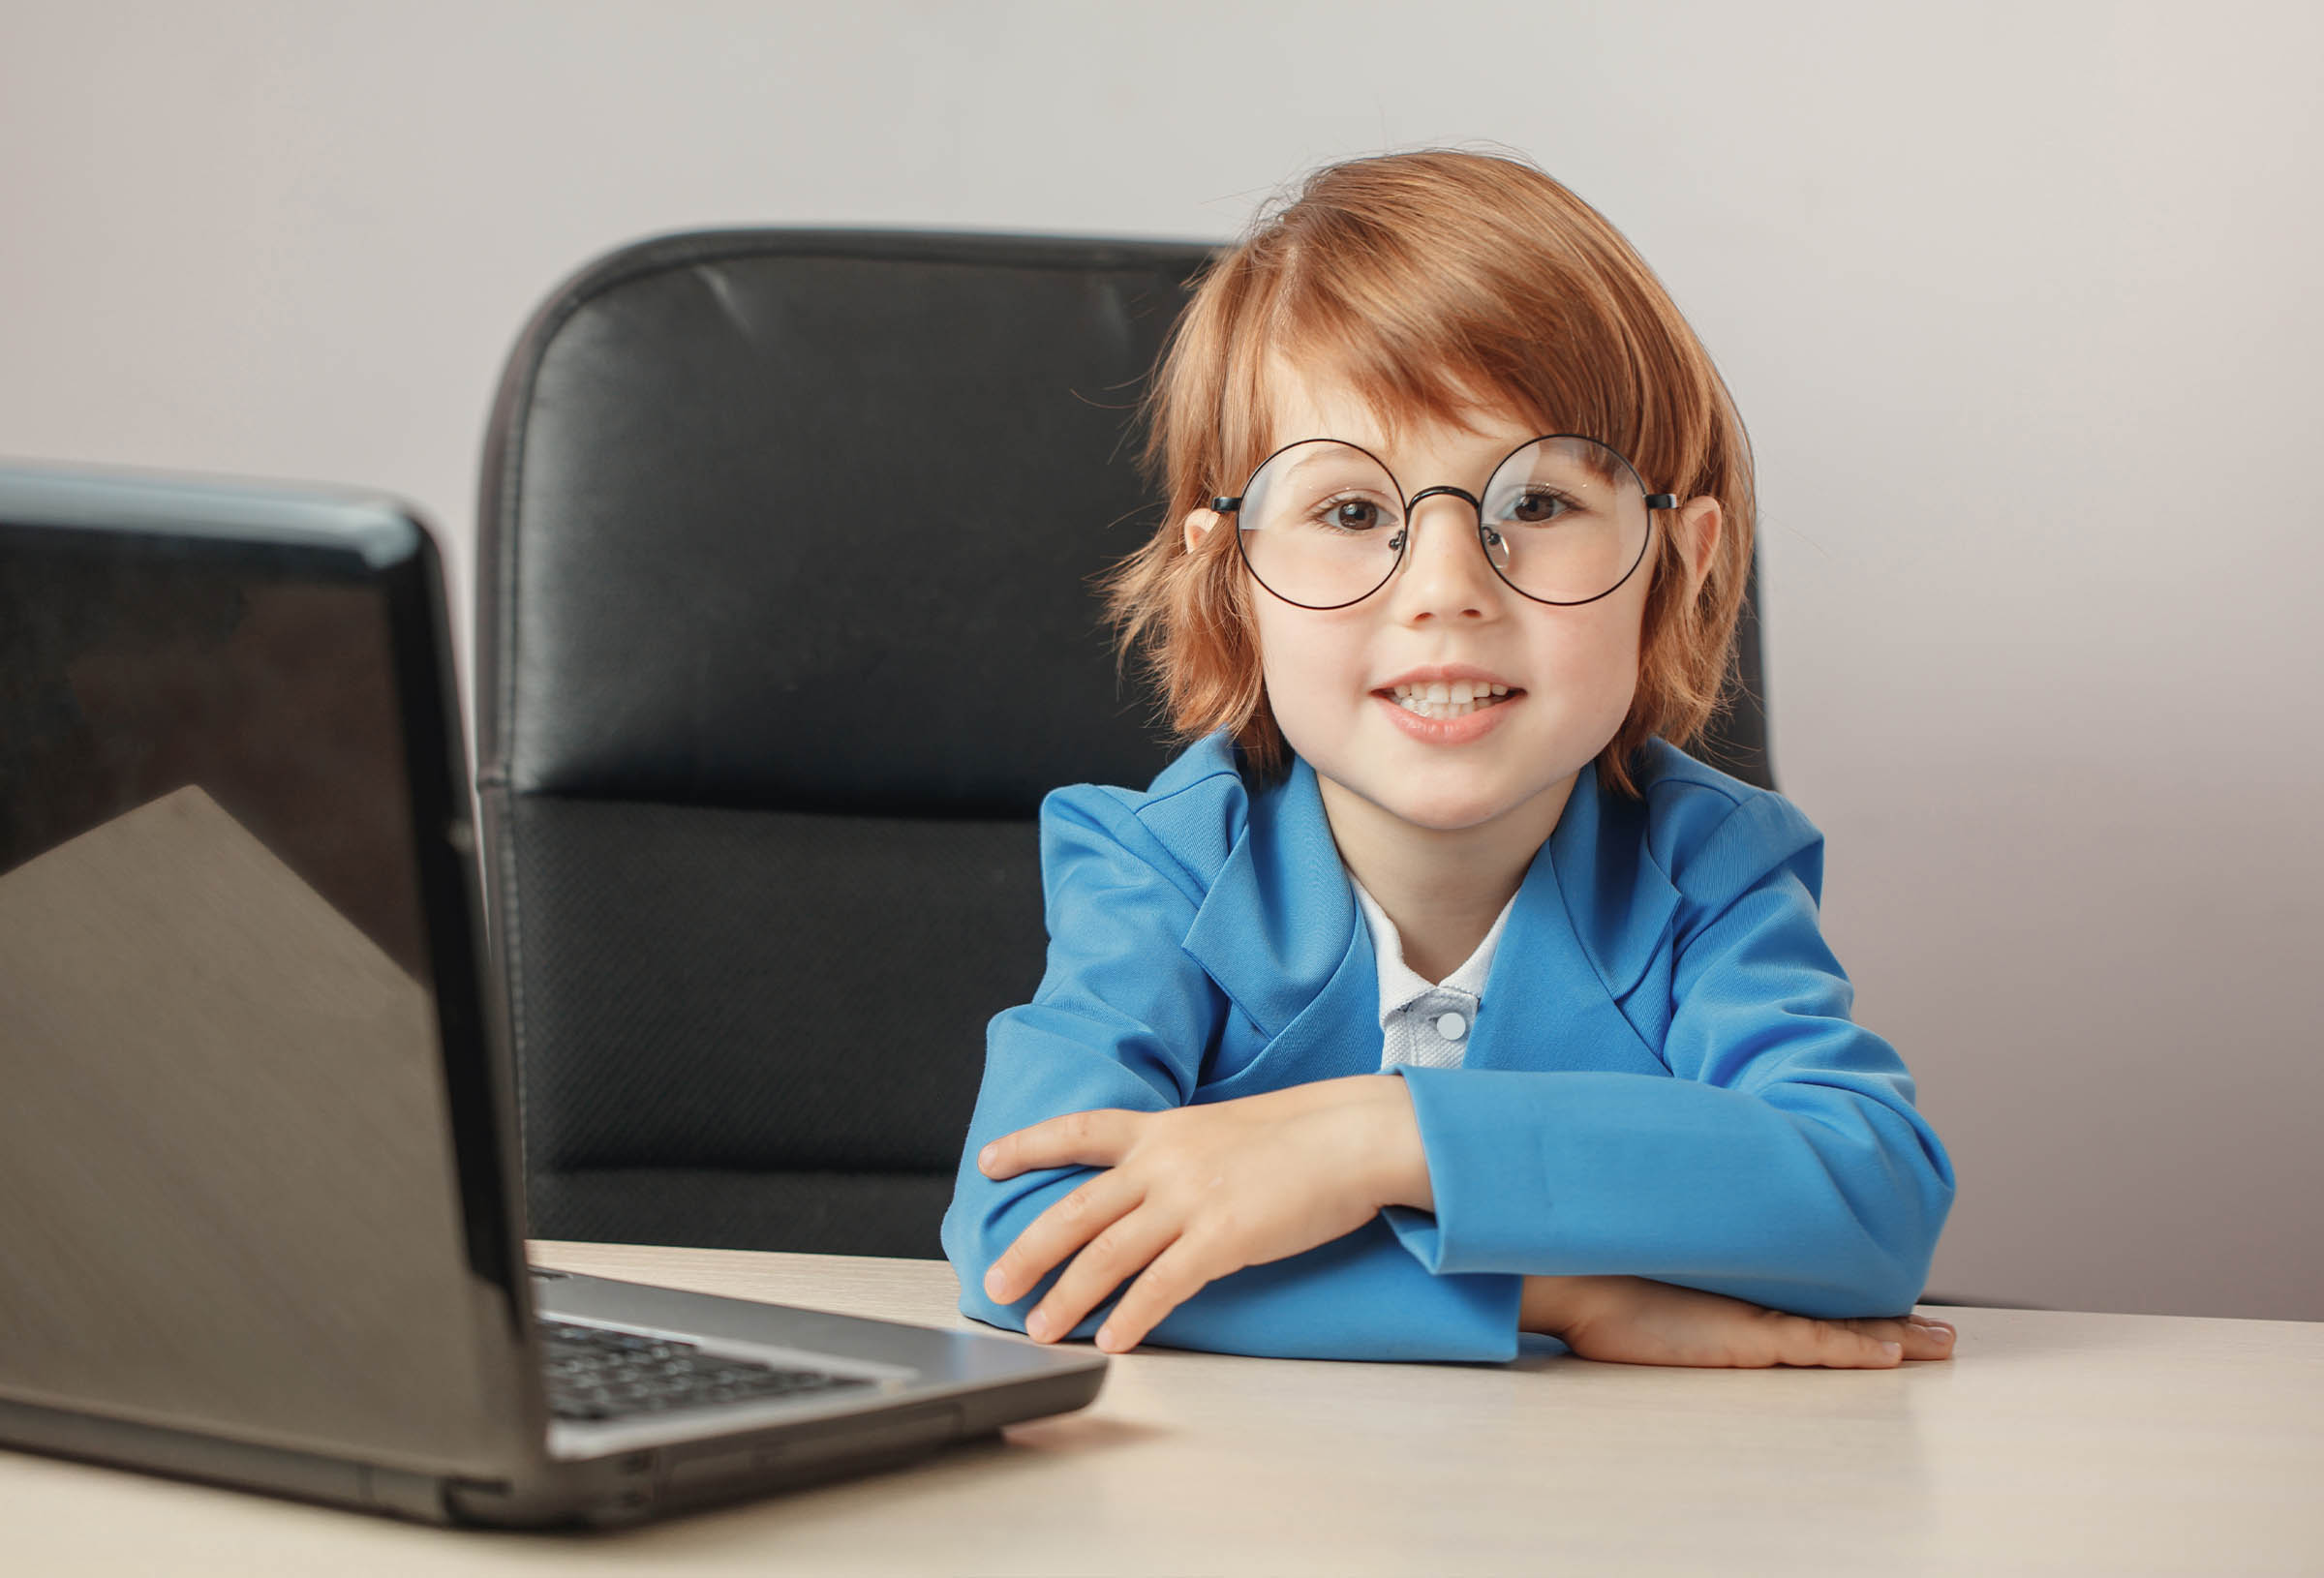 Litttle girl looking at laptop screen with expression of surprised and excitement. Smart, smilling little girl taking notes . Communication in business concept.